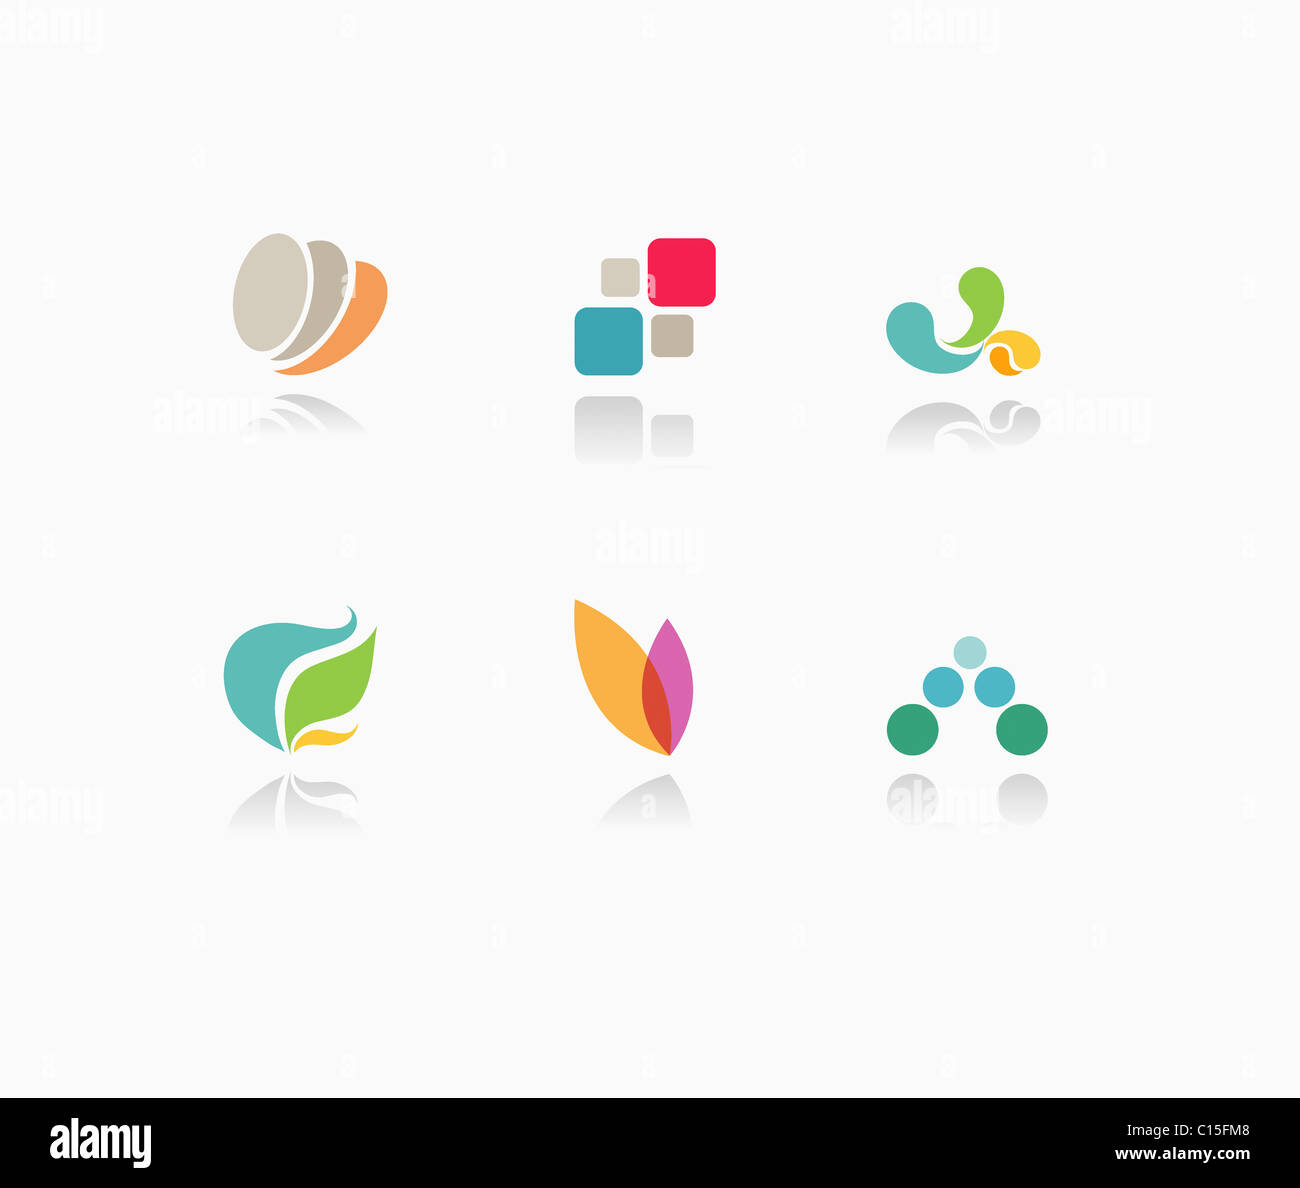 abstract symbol icons Stock Photo